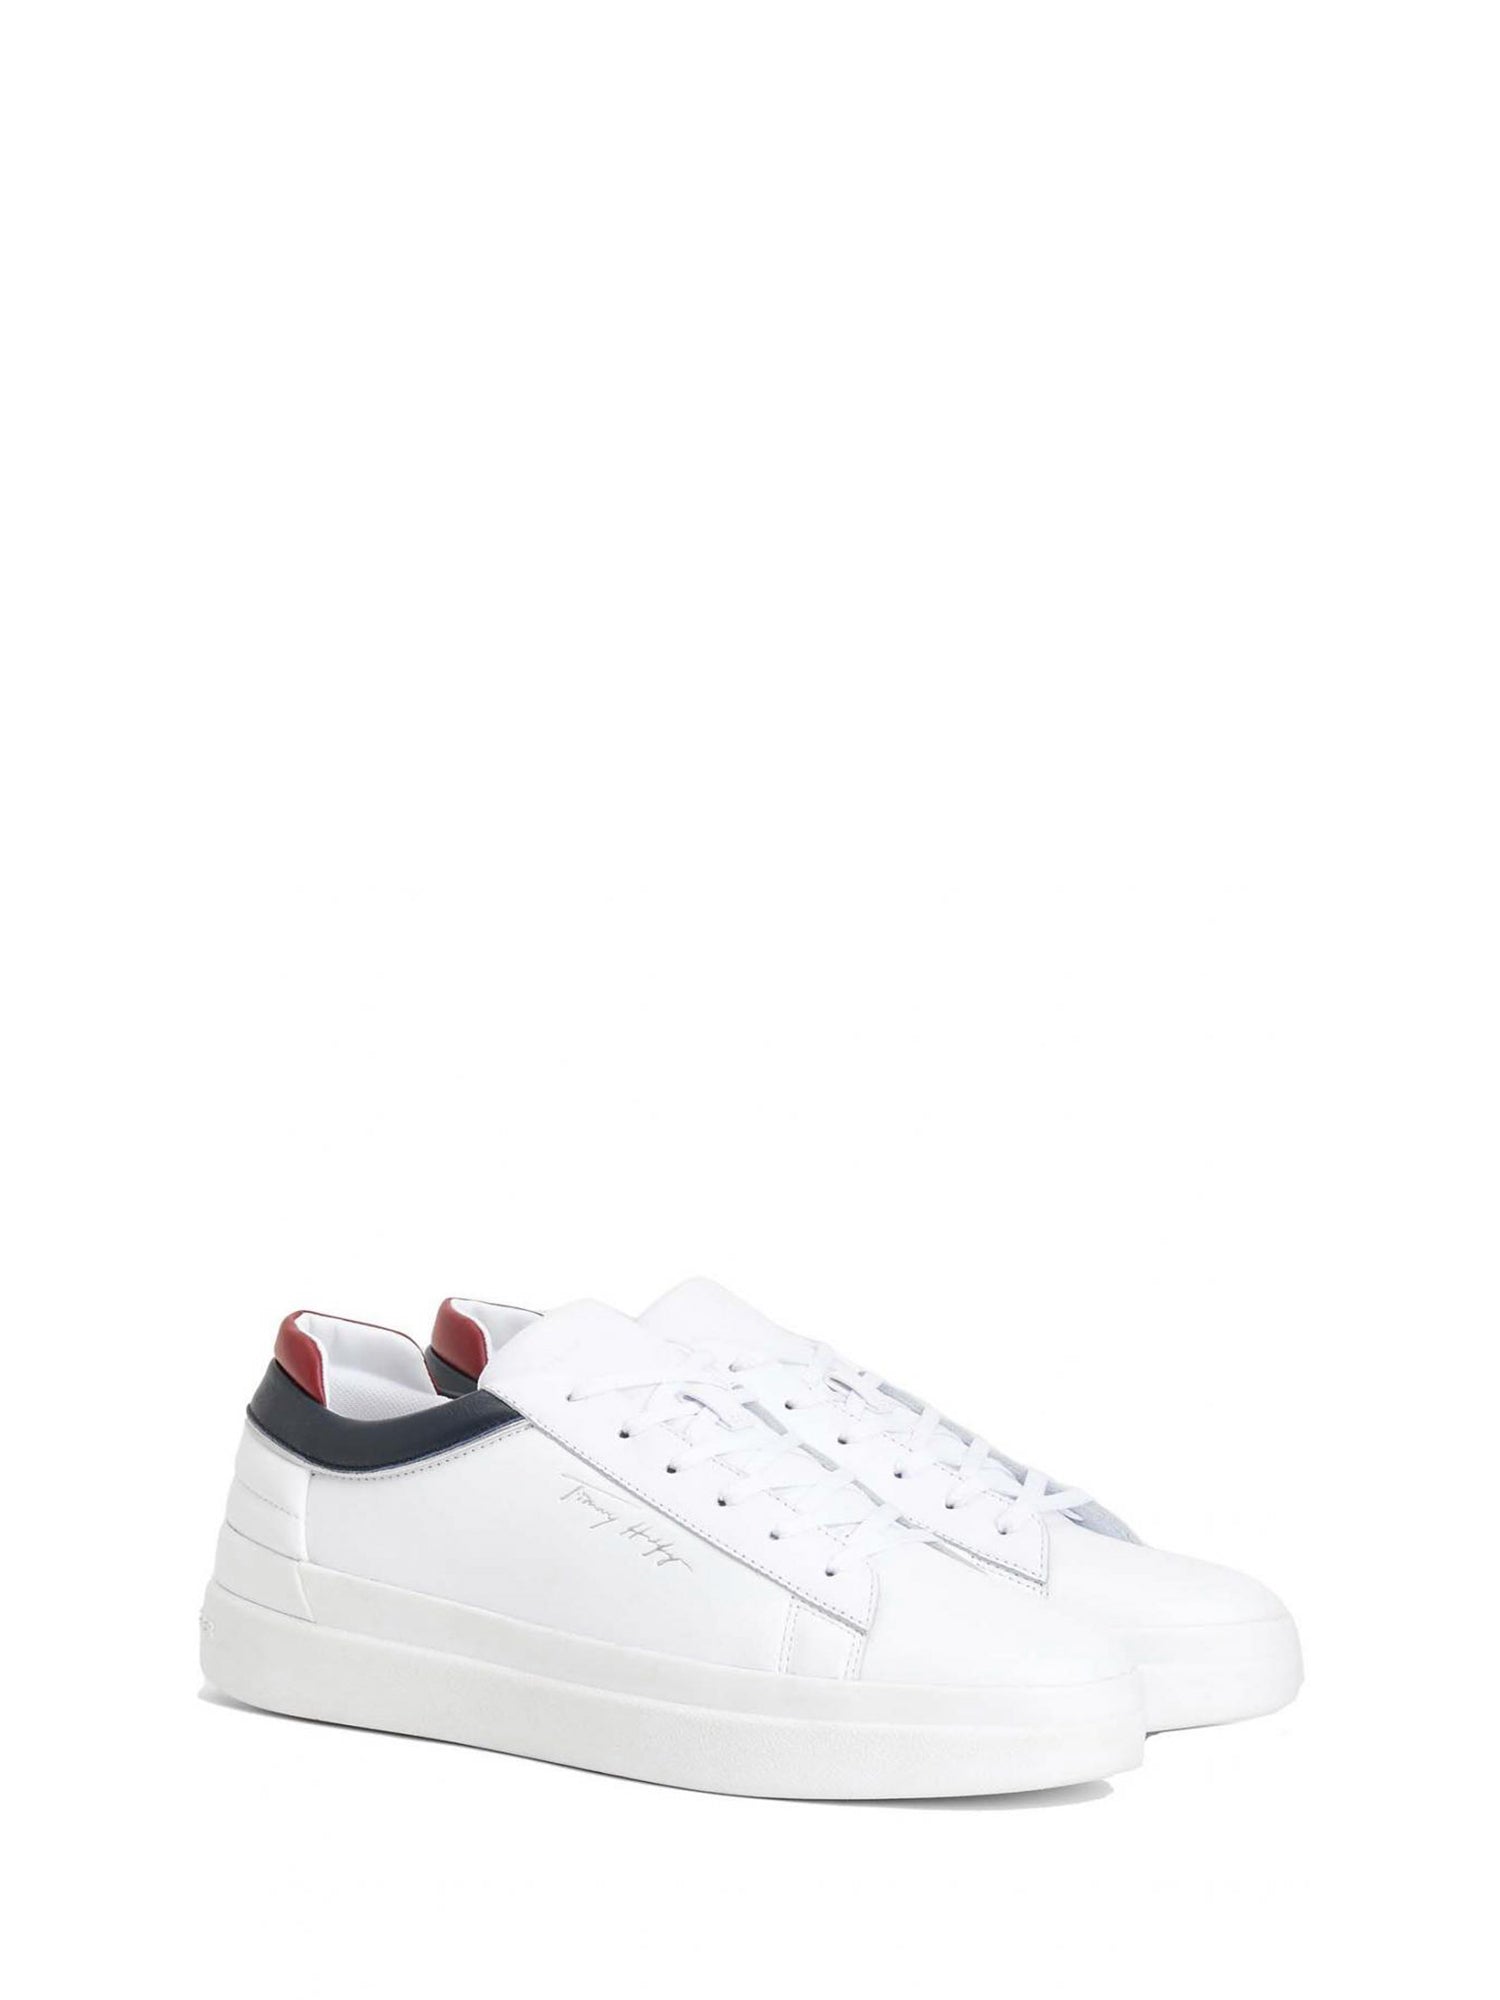 TOMMY HILFIGER SNEAKERS IN PELLE COLOR BLOCK BIANCO